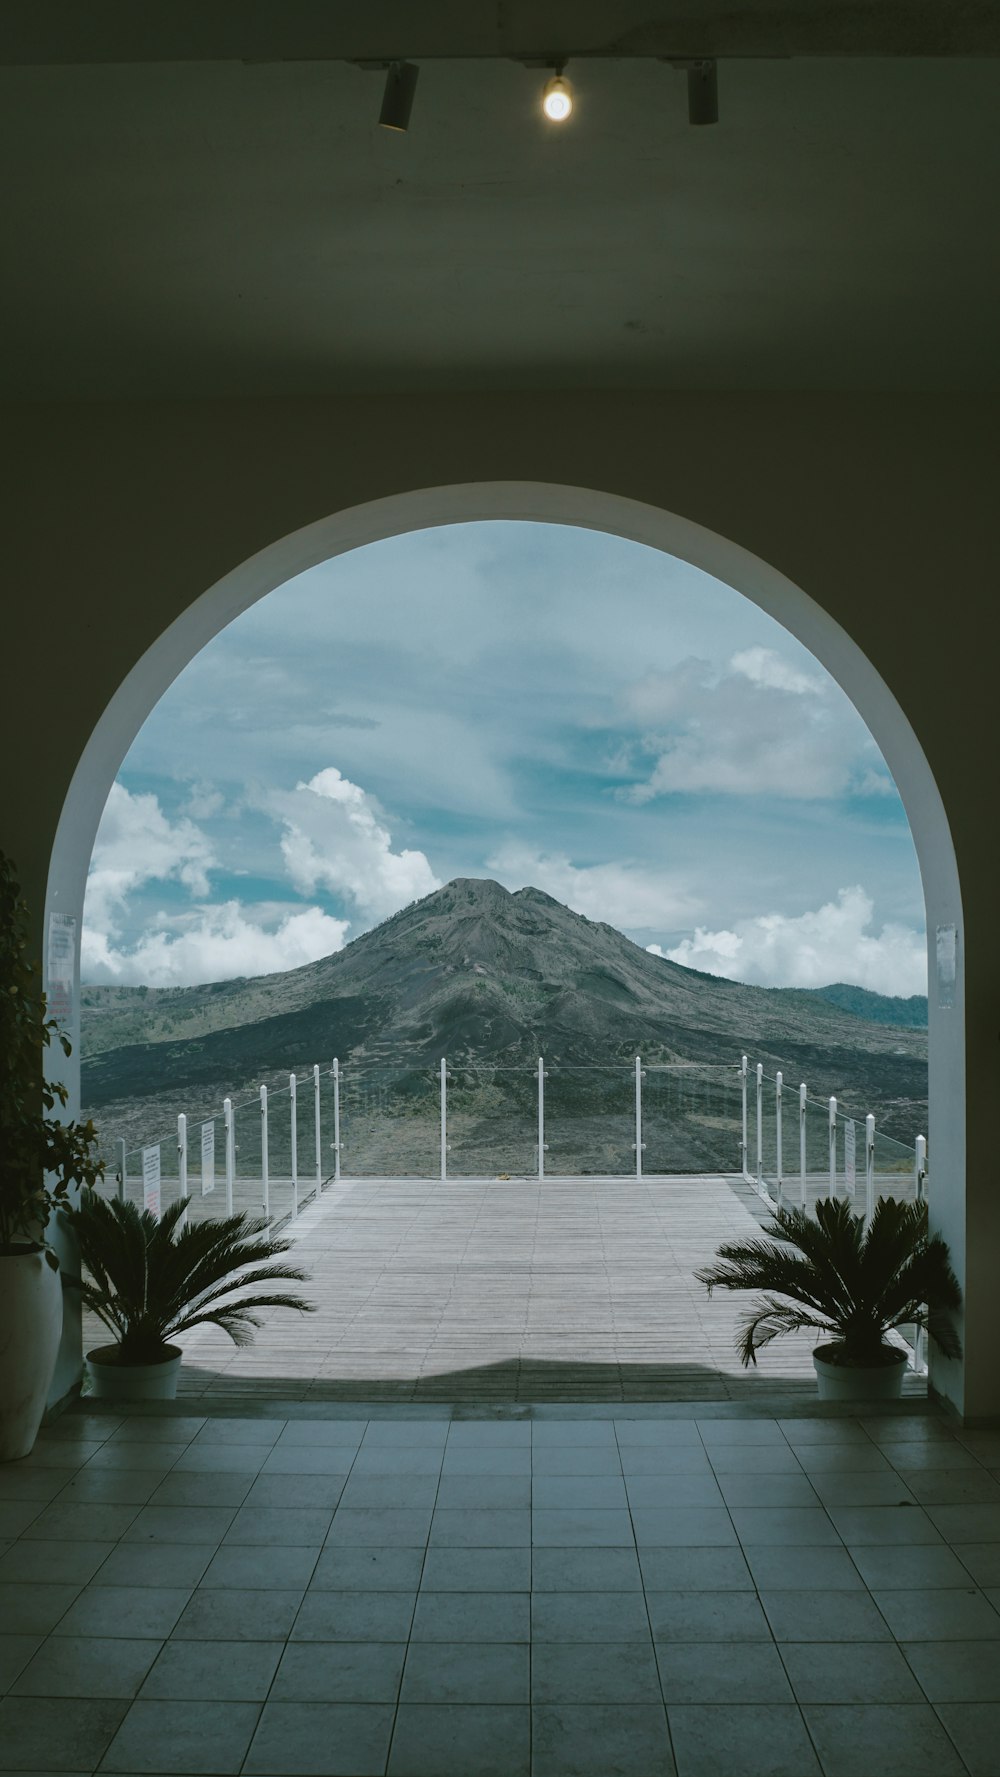 a view of a mountain through an arch in a building